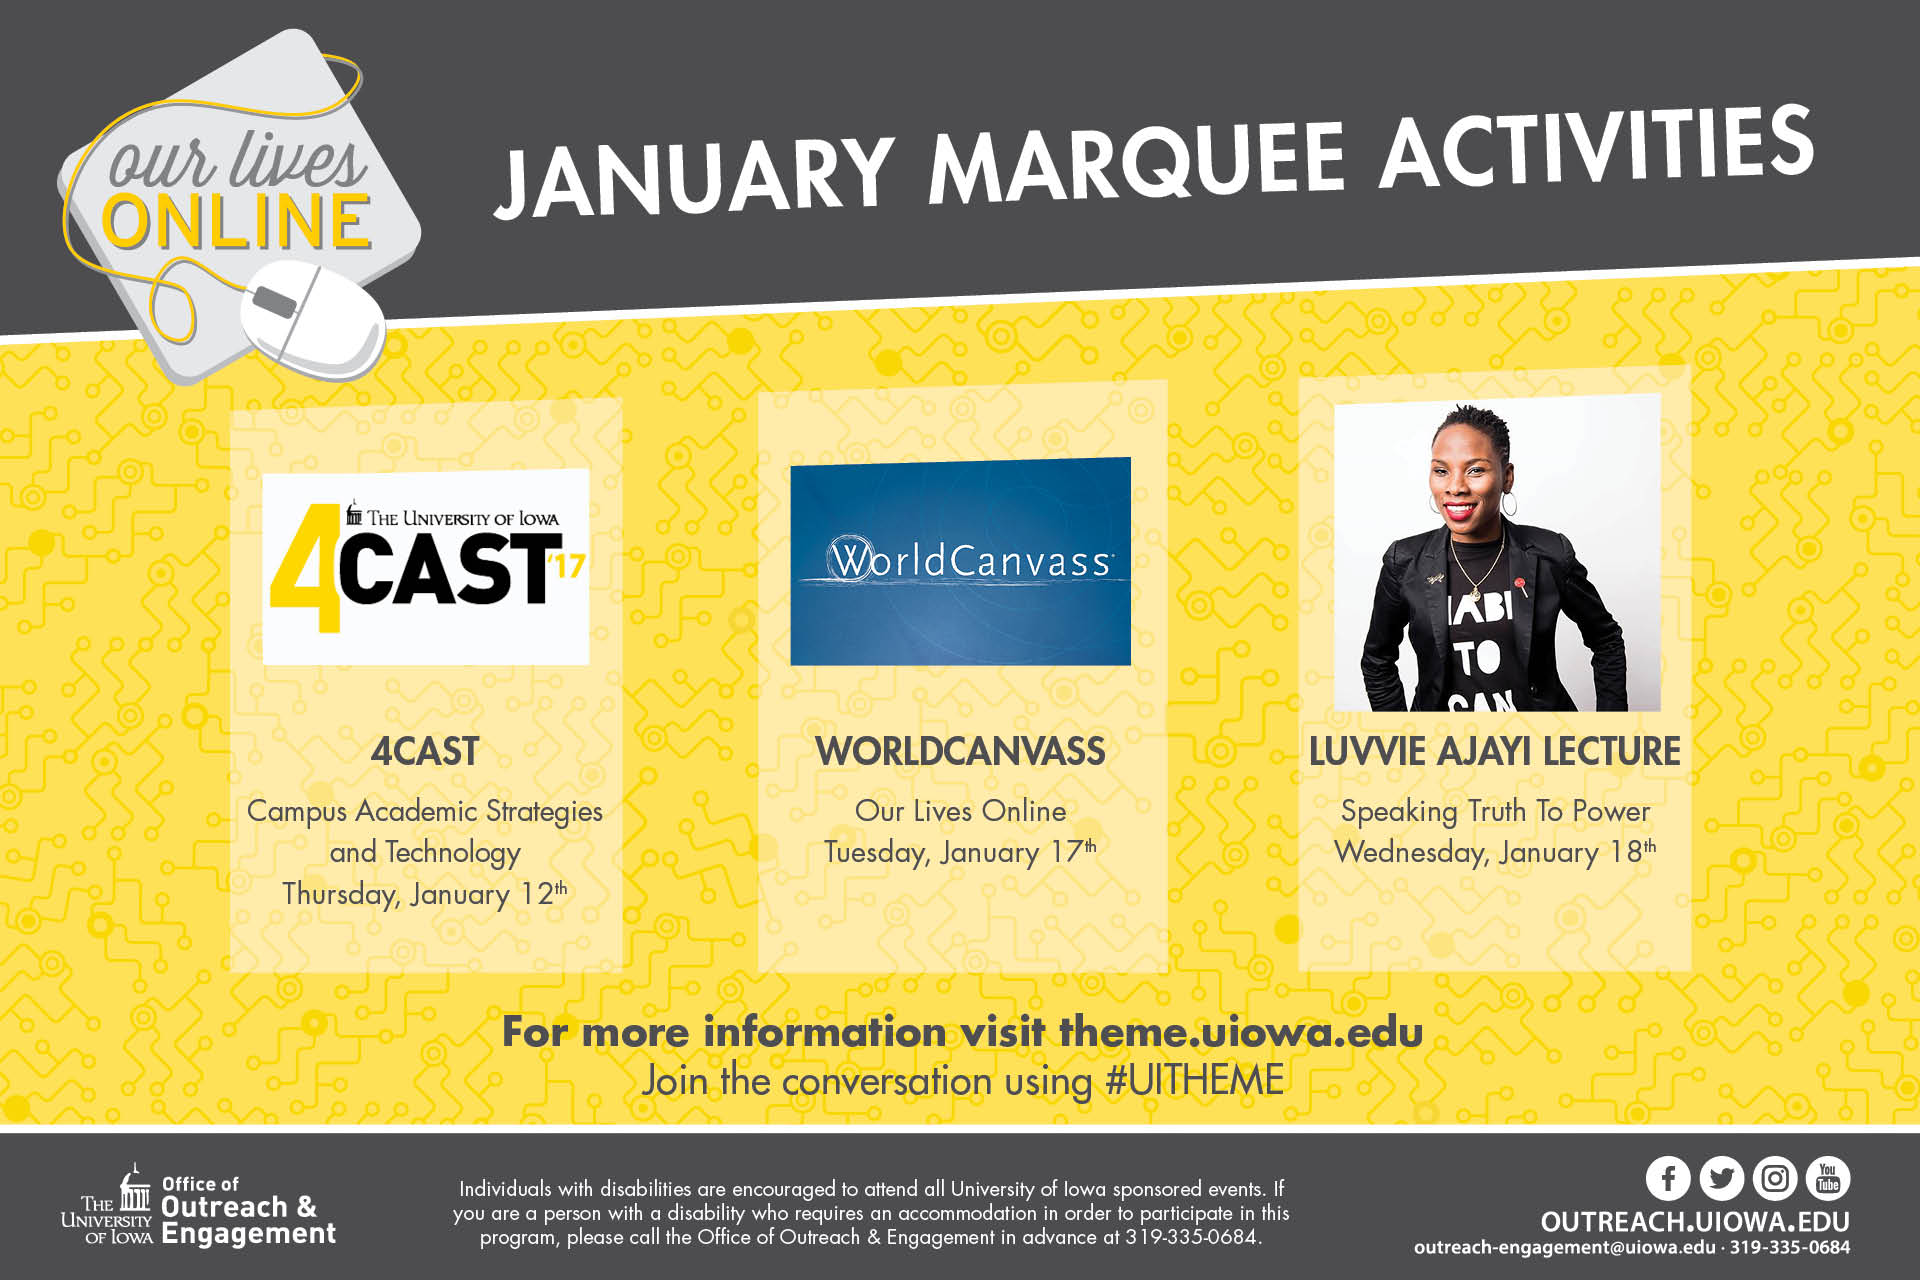 Our Lives Online: January Marquee Activities: 4Cast17: Campus Academic Strategies and Technology, Thursday, January 12; WorldCanvass: Our Lives Onlie: Tuesday, January 17; Luvvie Ajayi Lecture: Speaking Truth to Power, Wednesday, January 18.  For more information, visit theme.uiowa.edu; join the conversation using #UITHEME.  outreach.uiowa.edi